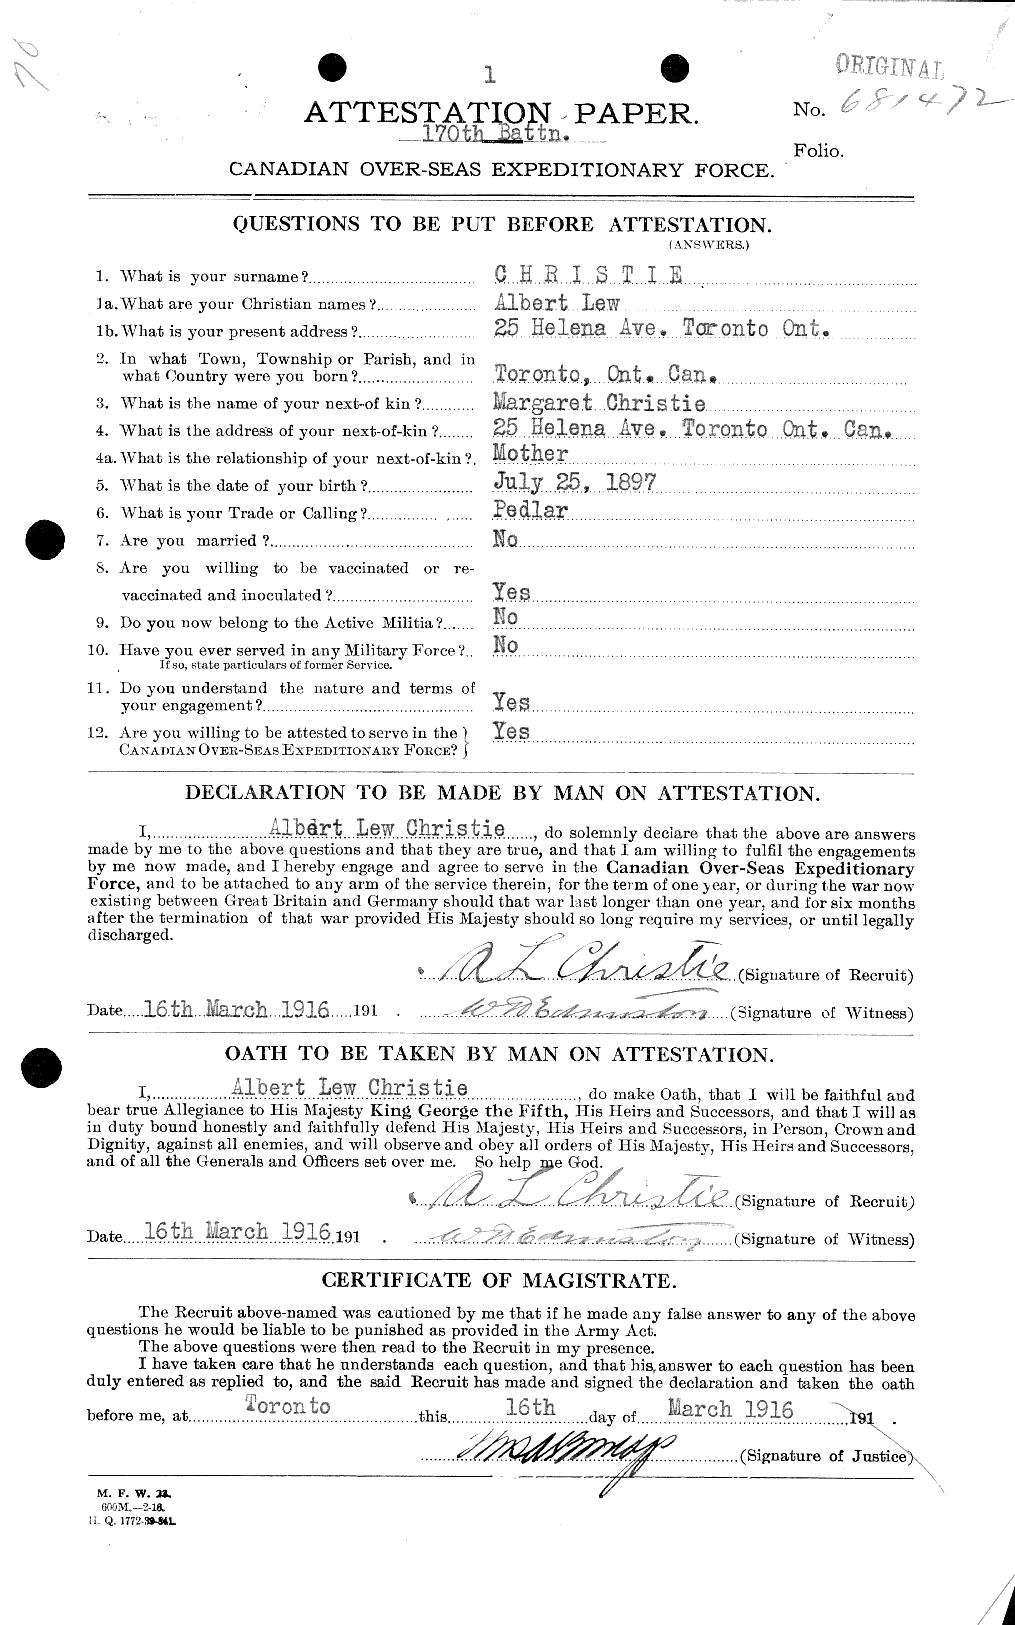 Personnel Records of the First World War - CEF 021855a